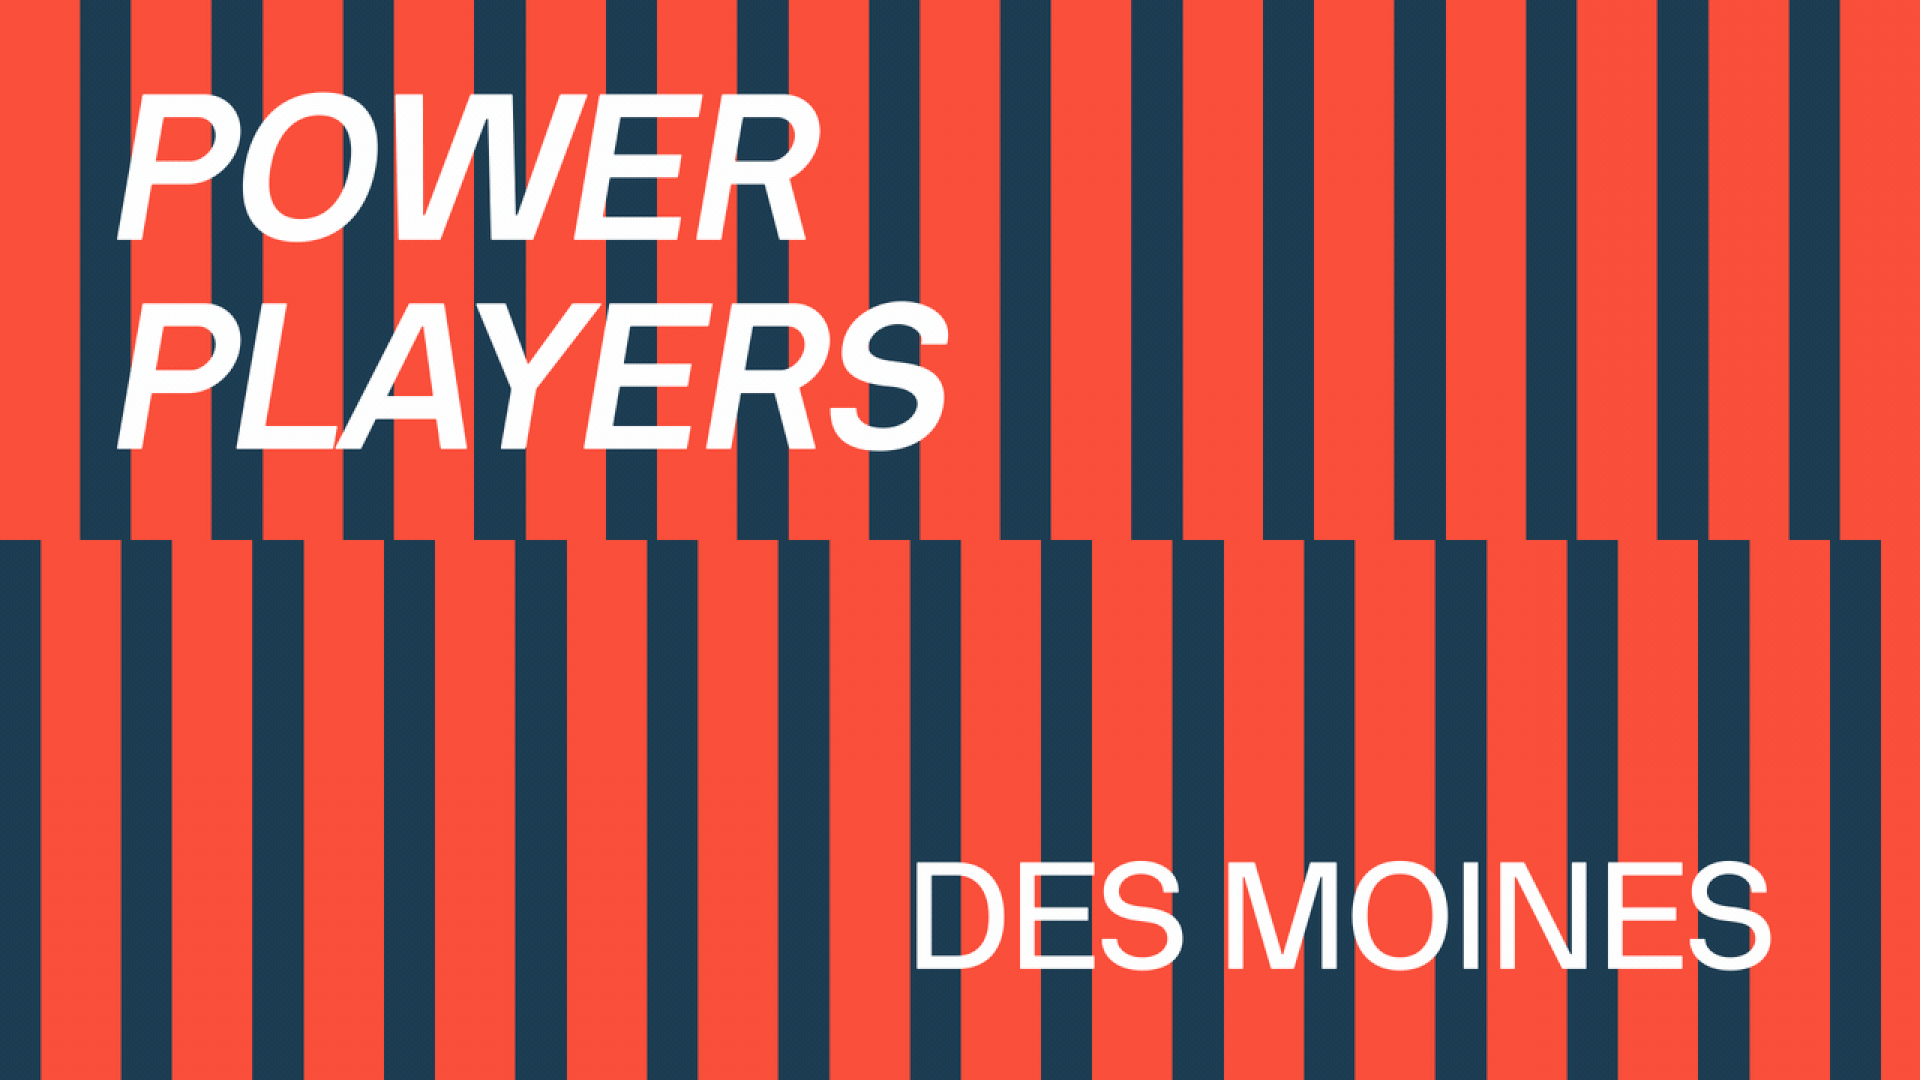 Illustration of two rows of dominos falling with text overlaid that reads Power Players Des Moines.